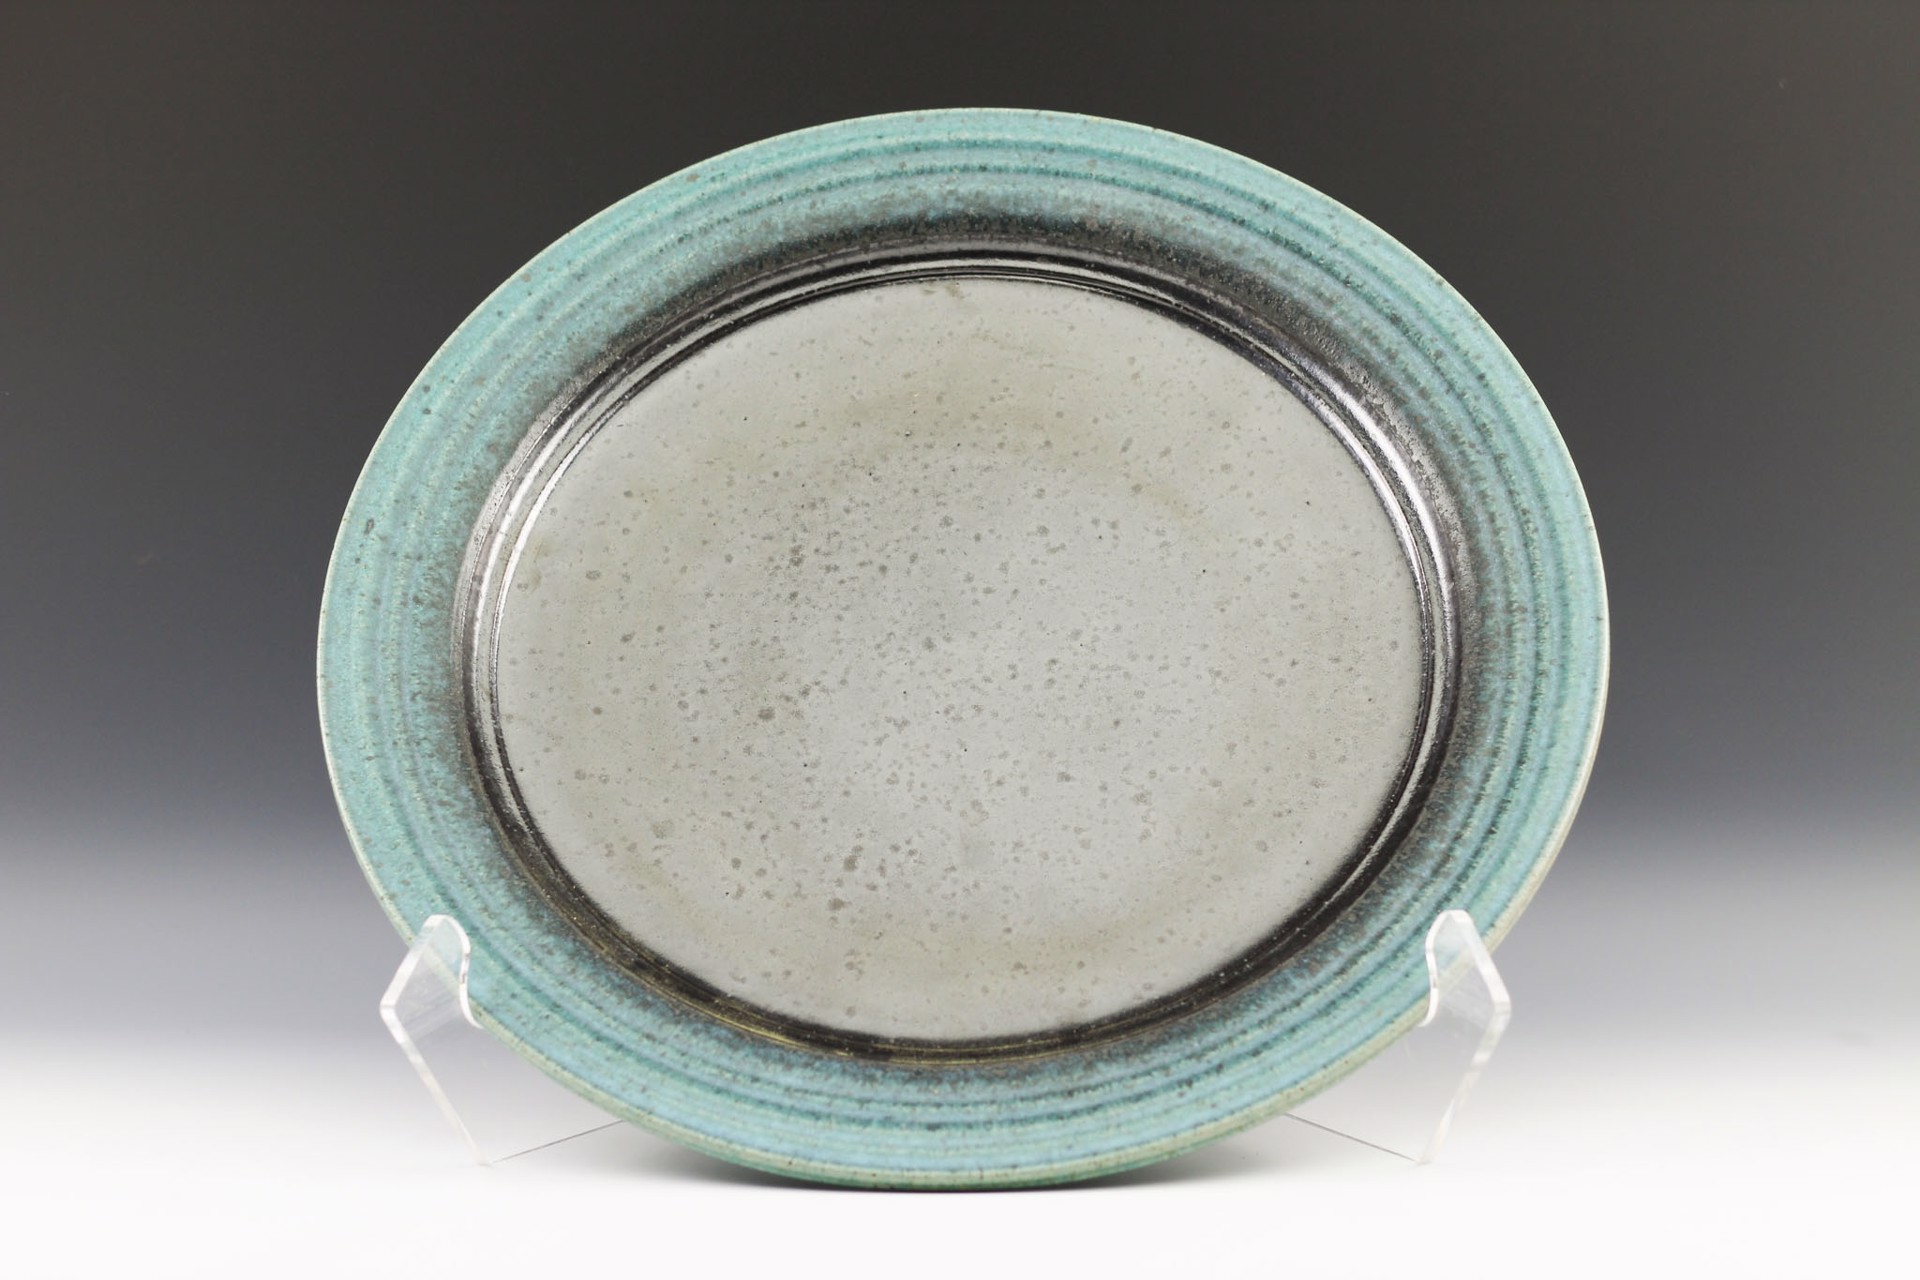 Turquoise and Black Platter by Winthrop Byers